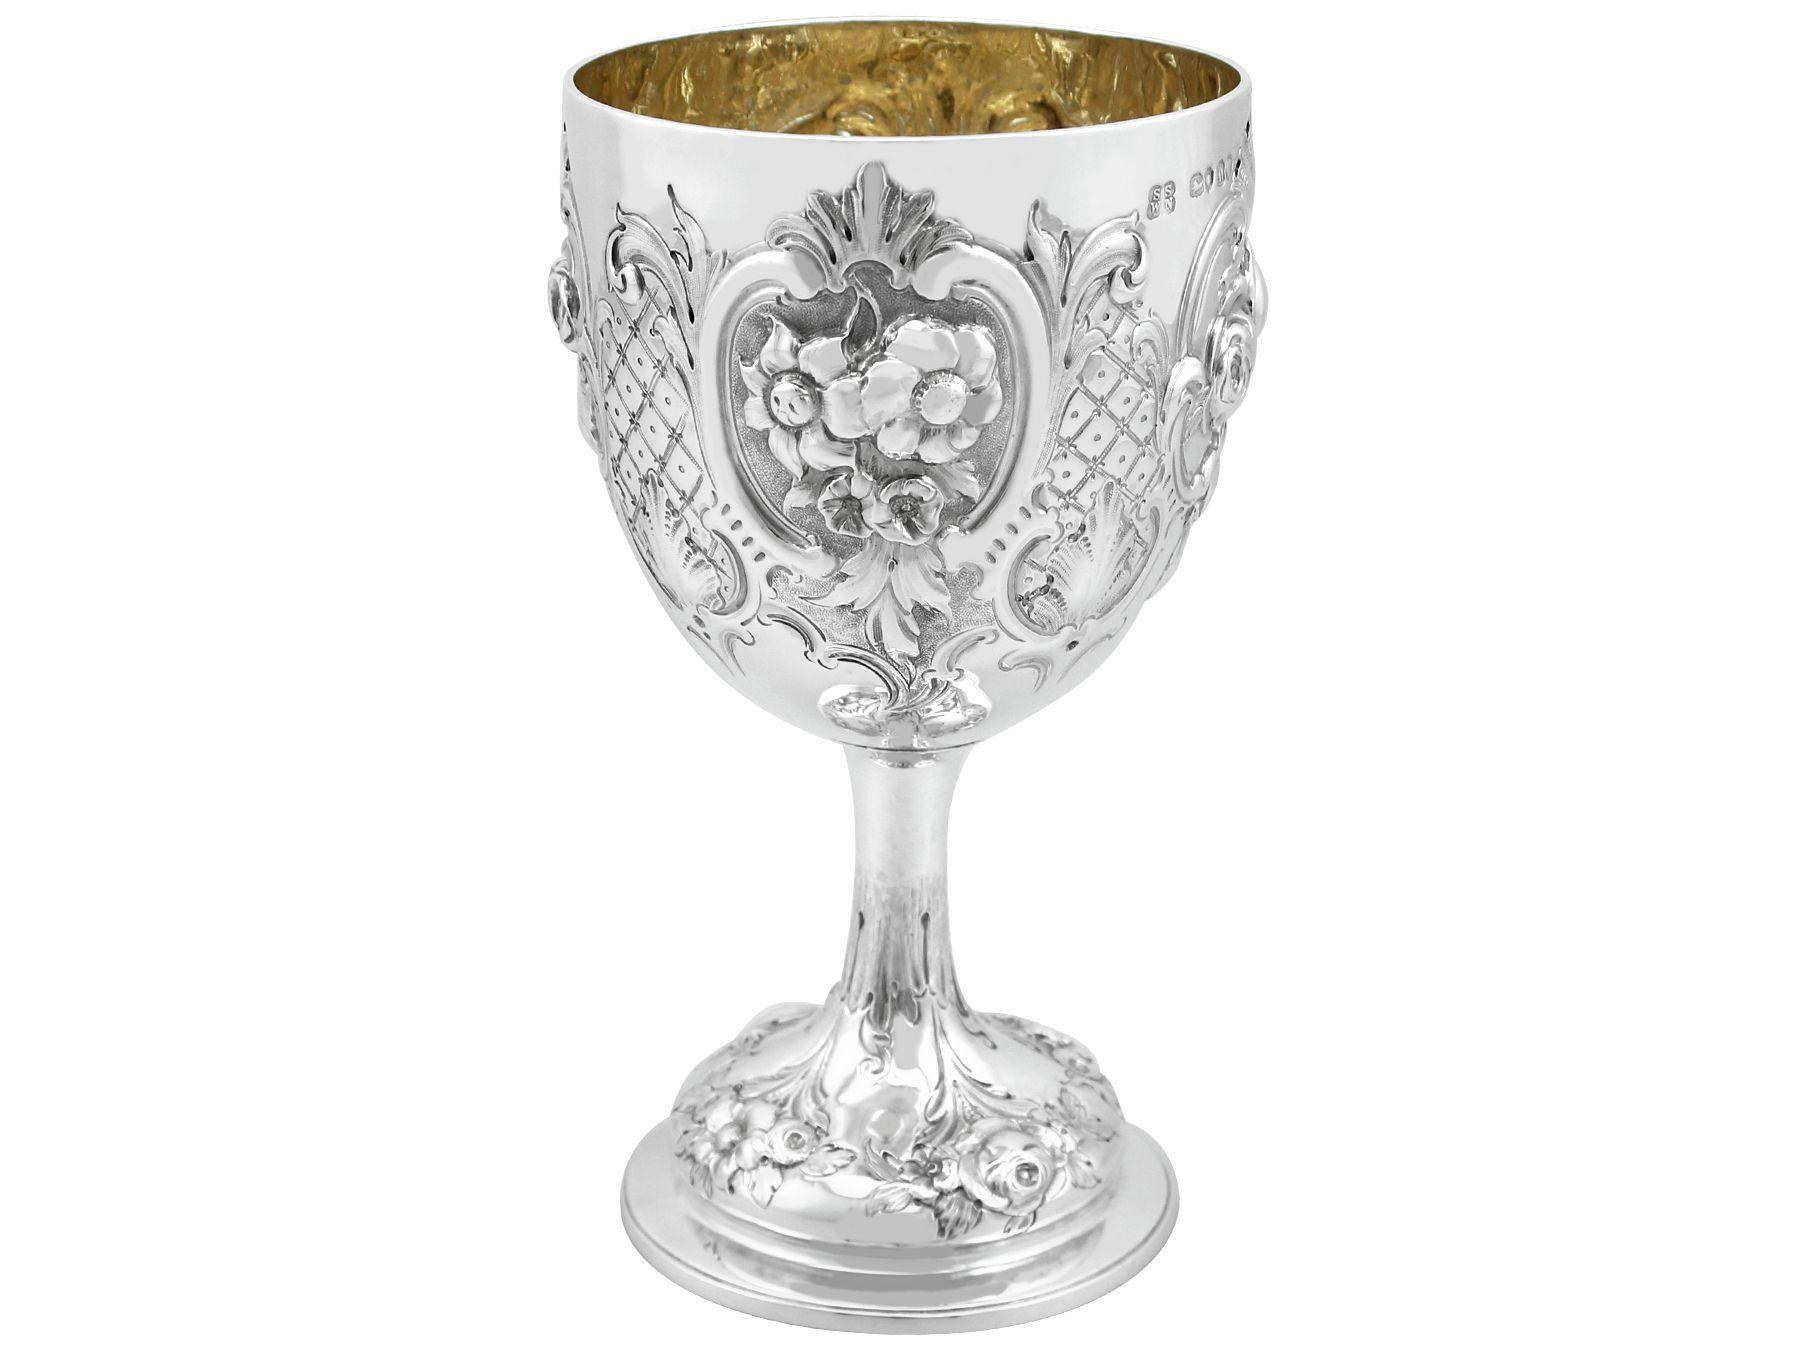 An exceptional, fine and impressive antique Victorian English sterling silver goblet; an addition to our collection of wine and drinks related silverware.

This exceptional, fine and impressive antique Victorian sterling silver goblet, has a